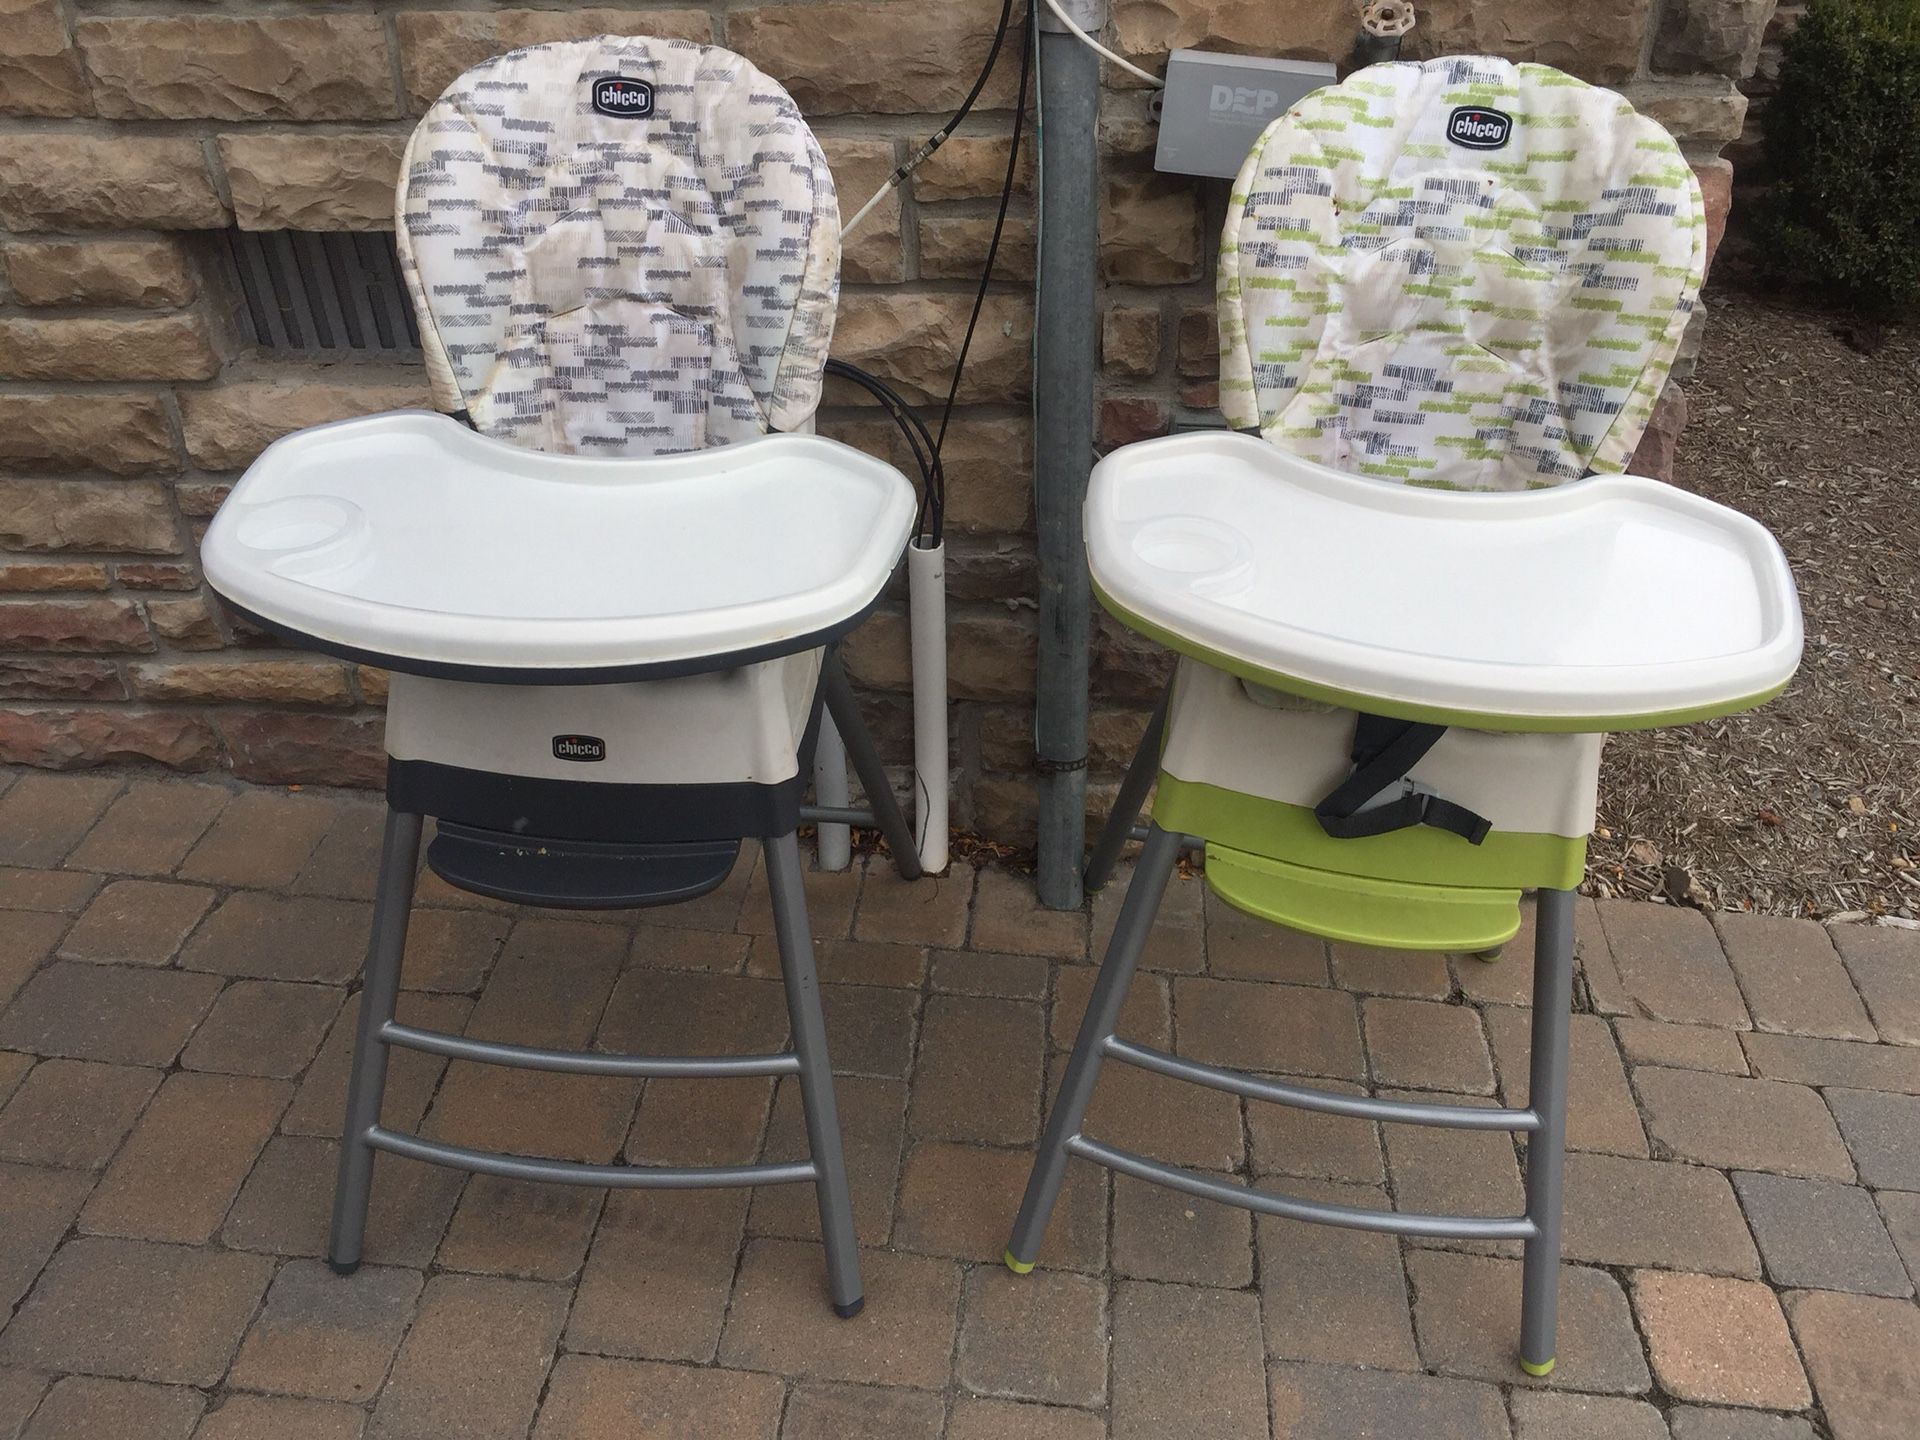 FREE (2) Chicco Convertible High Chairs